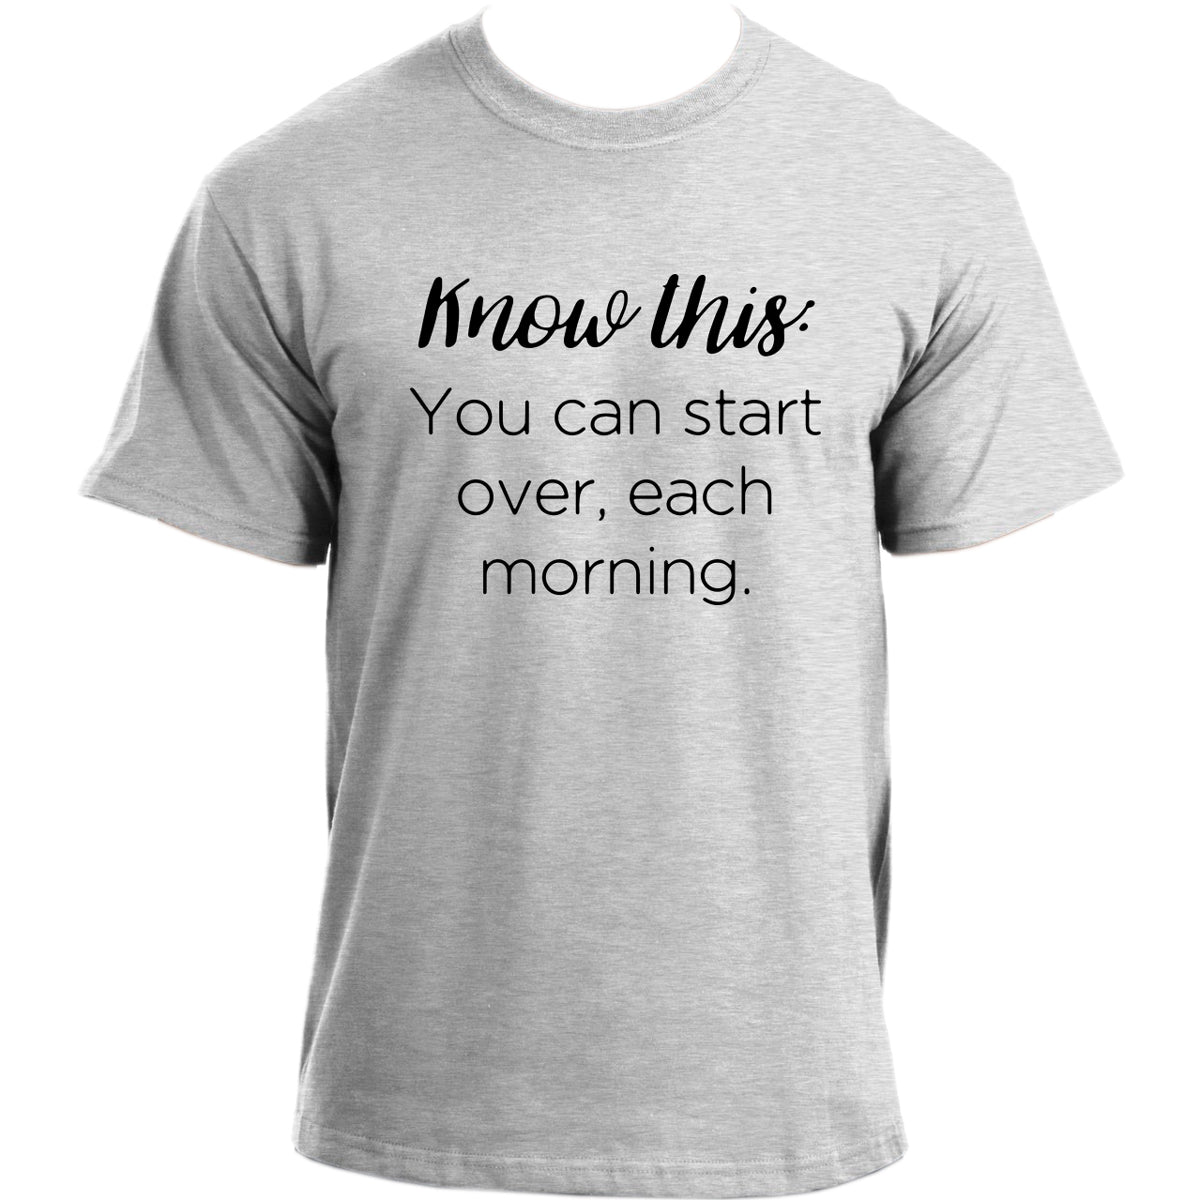 Know this: you can start over each morning I Inspirational quote T-shirt